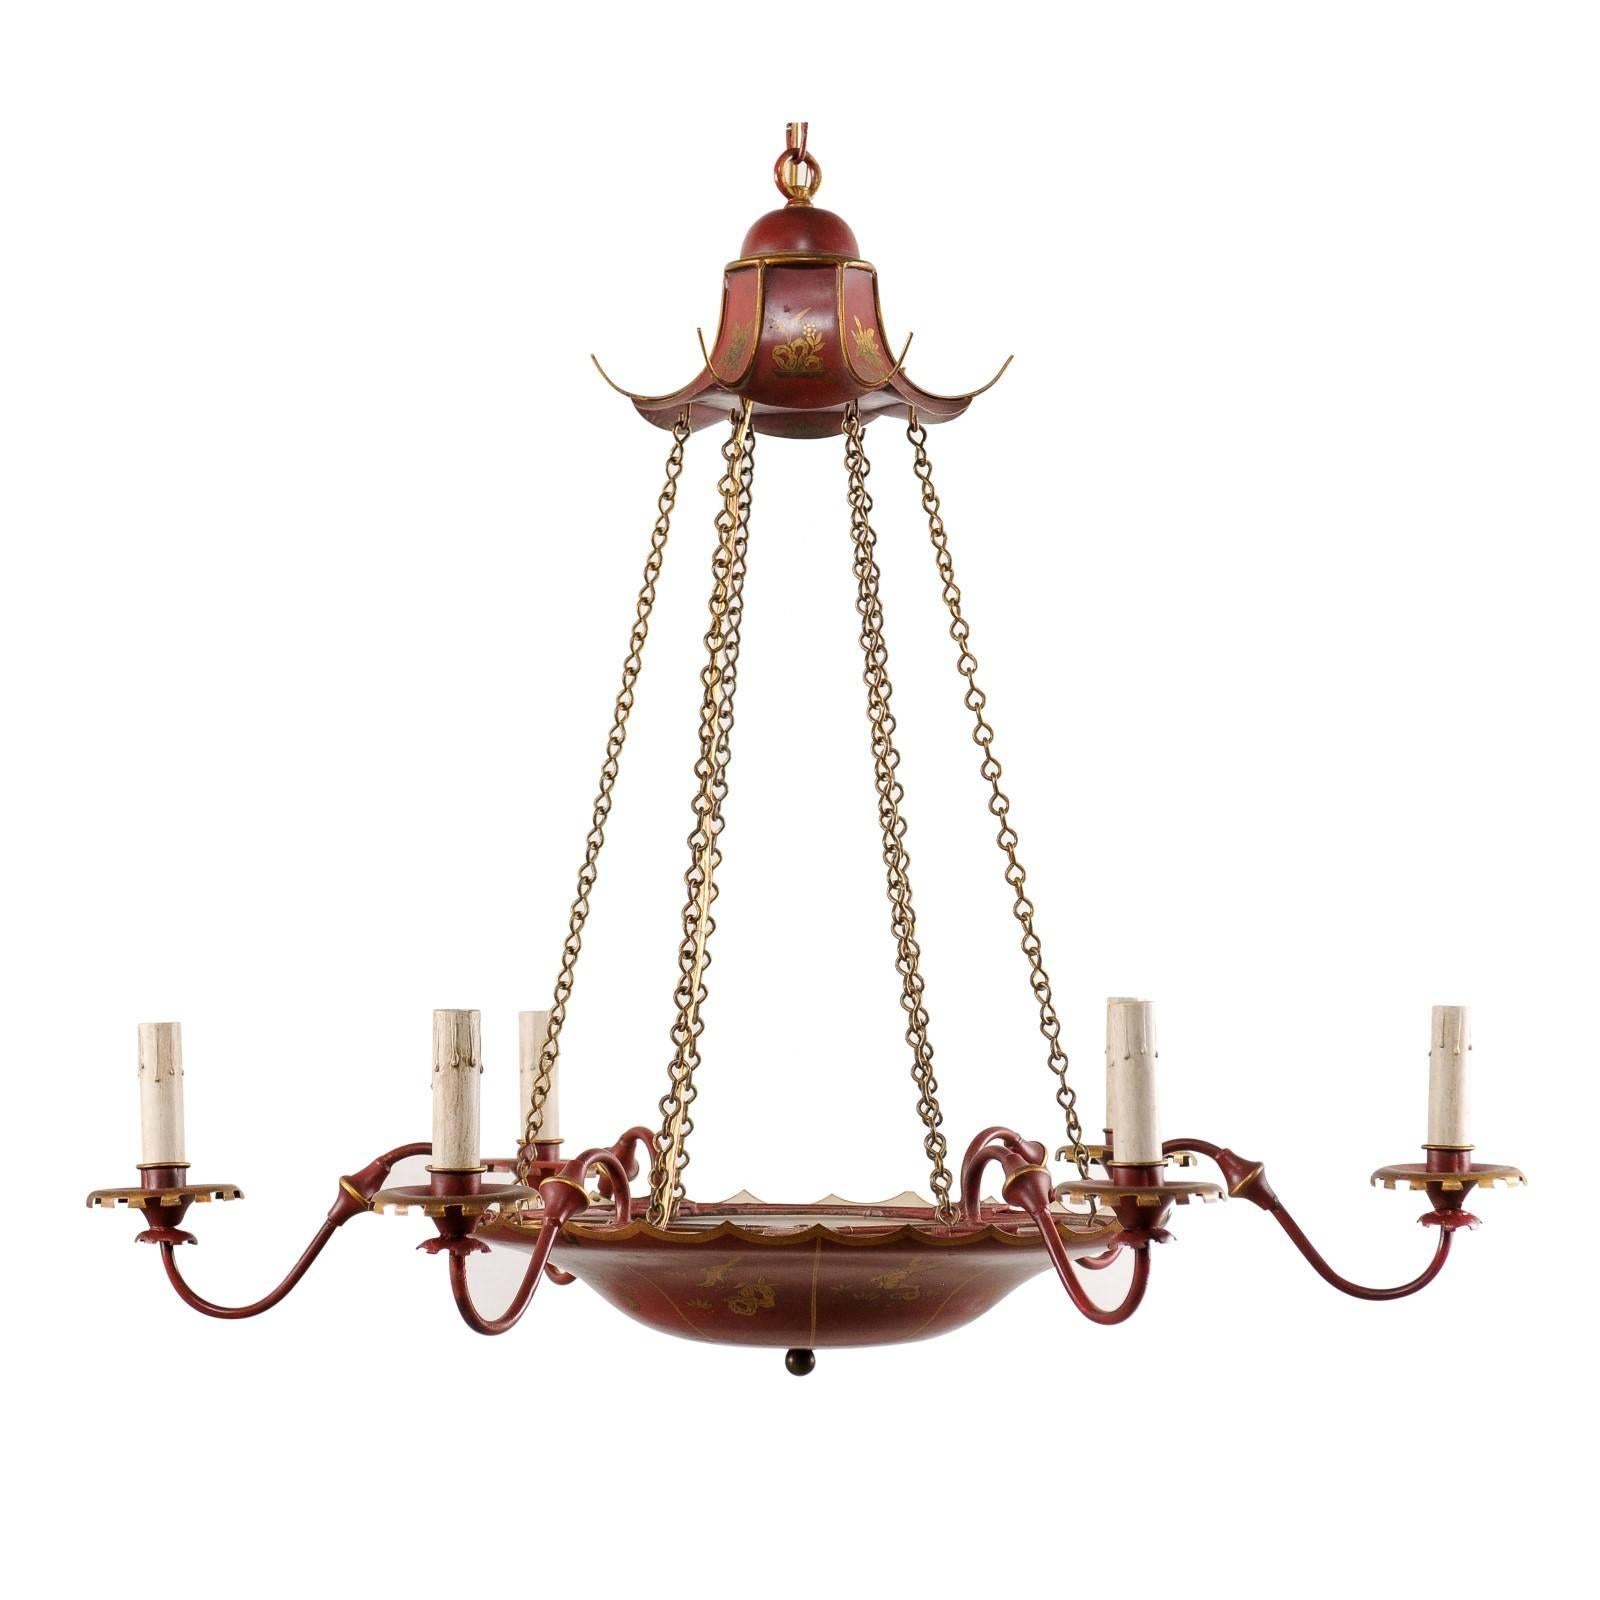 Vintage English Red Tole Six-Light Chandelier with Chinoiserie Gold Color Decor